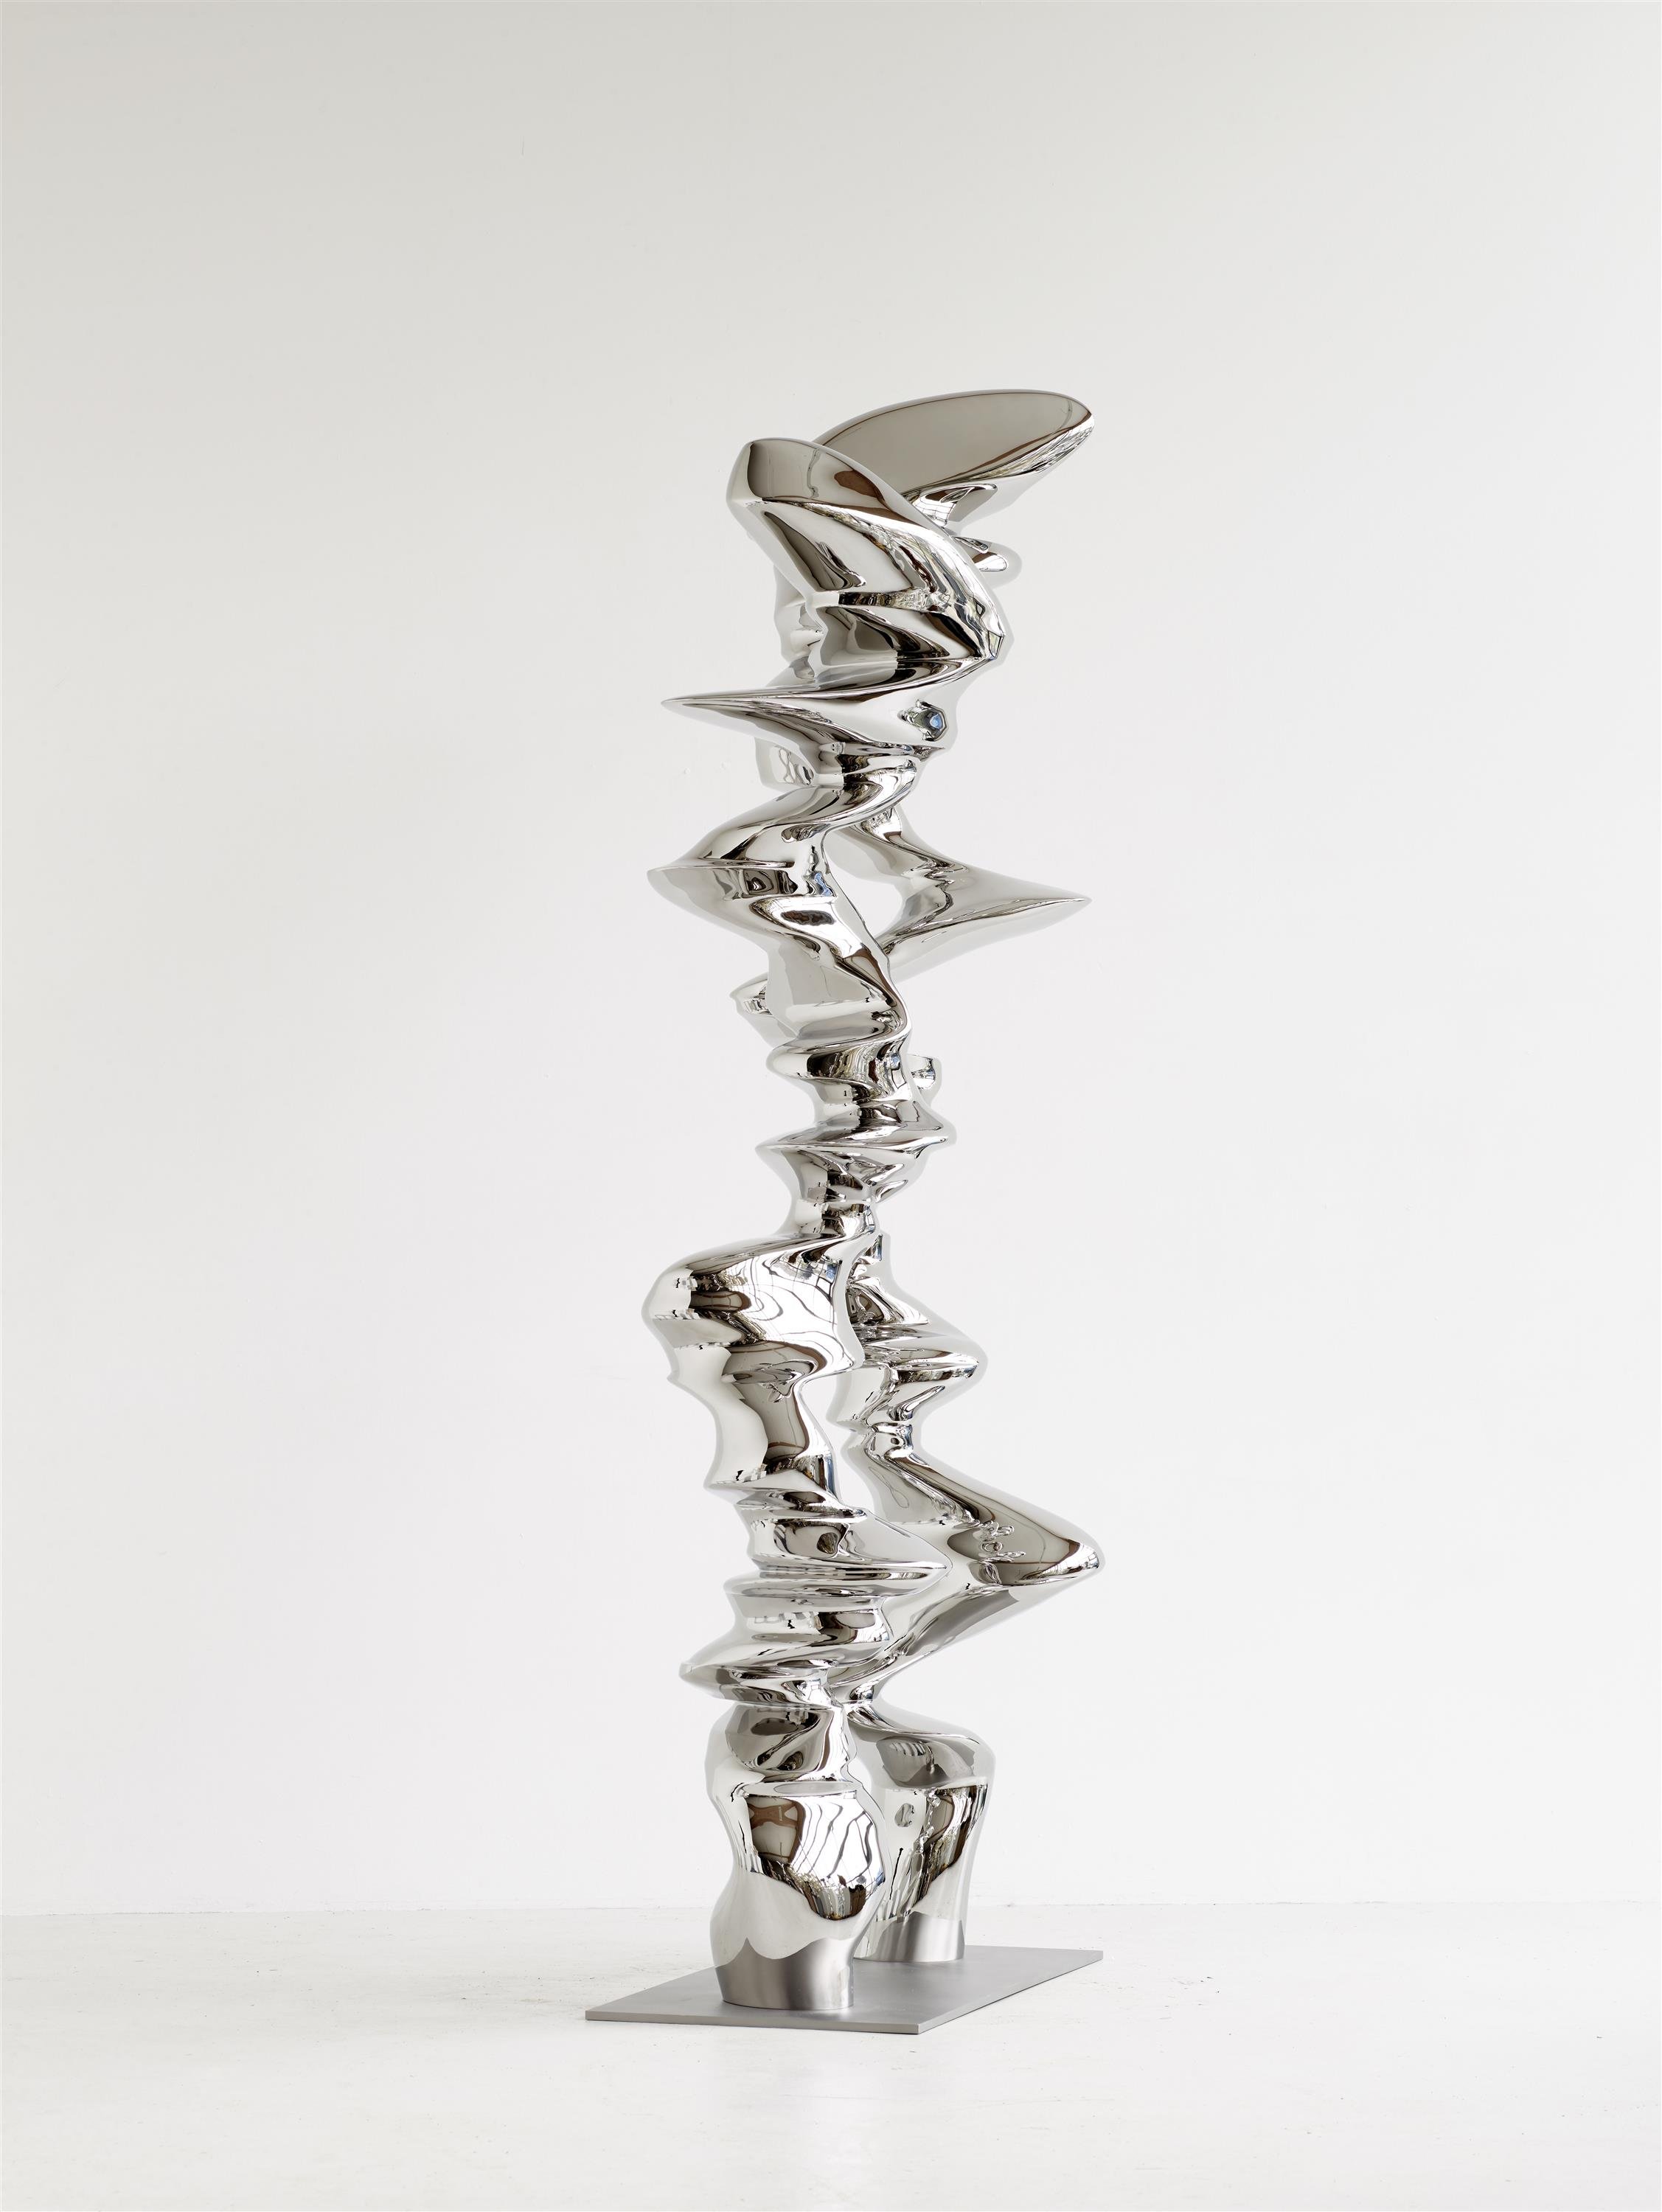 Tony Cragg / Points of View / 2019